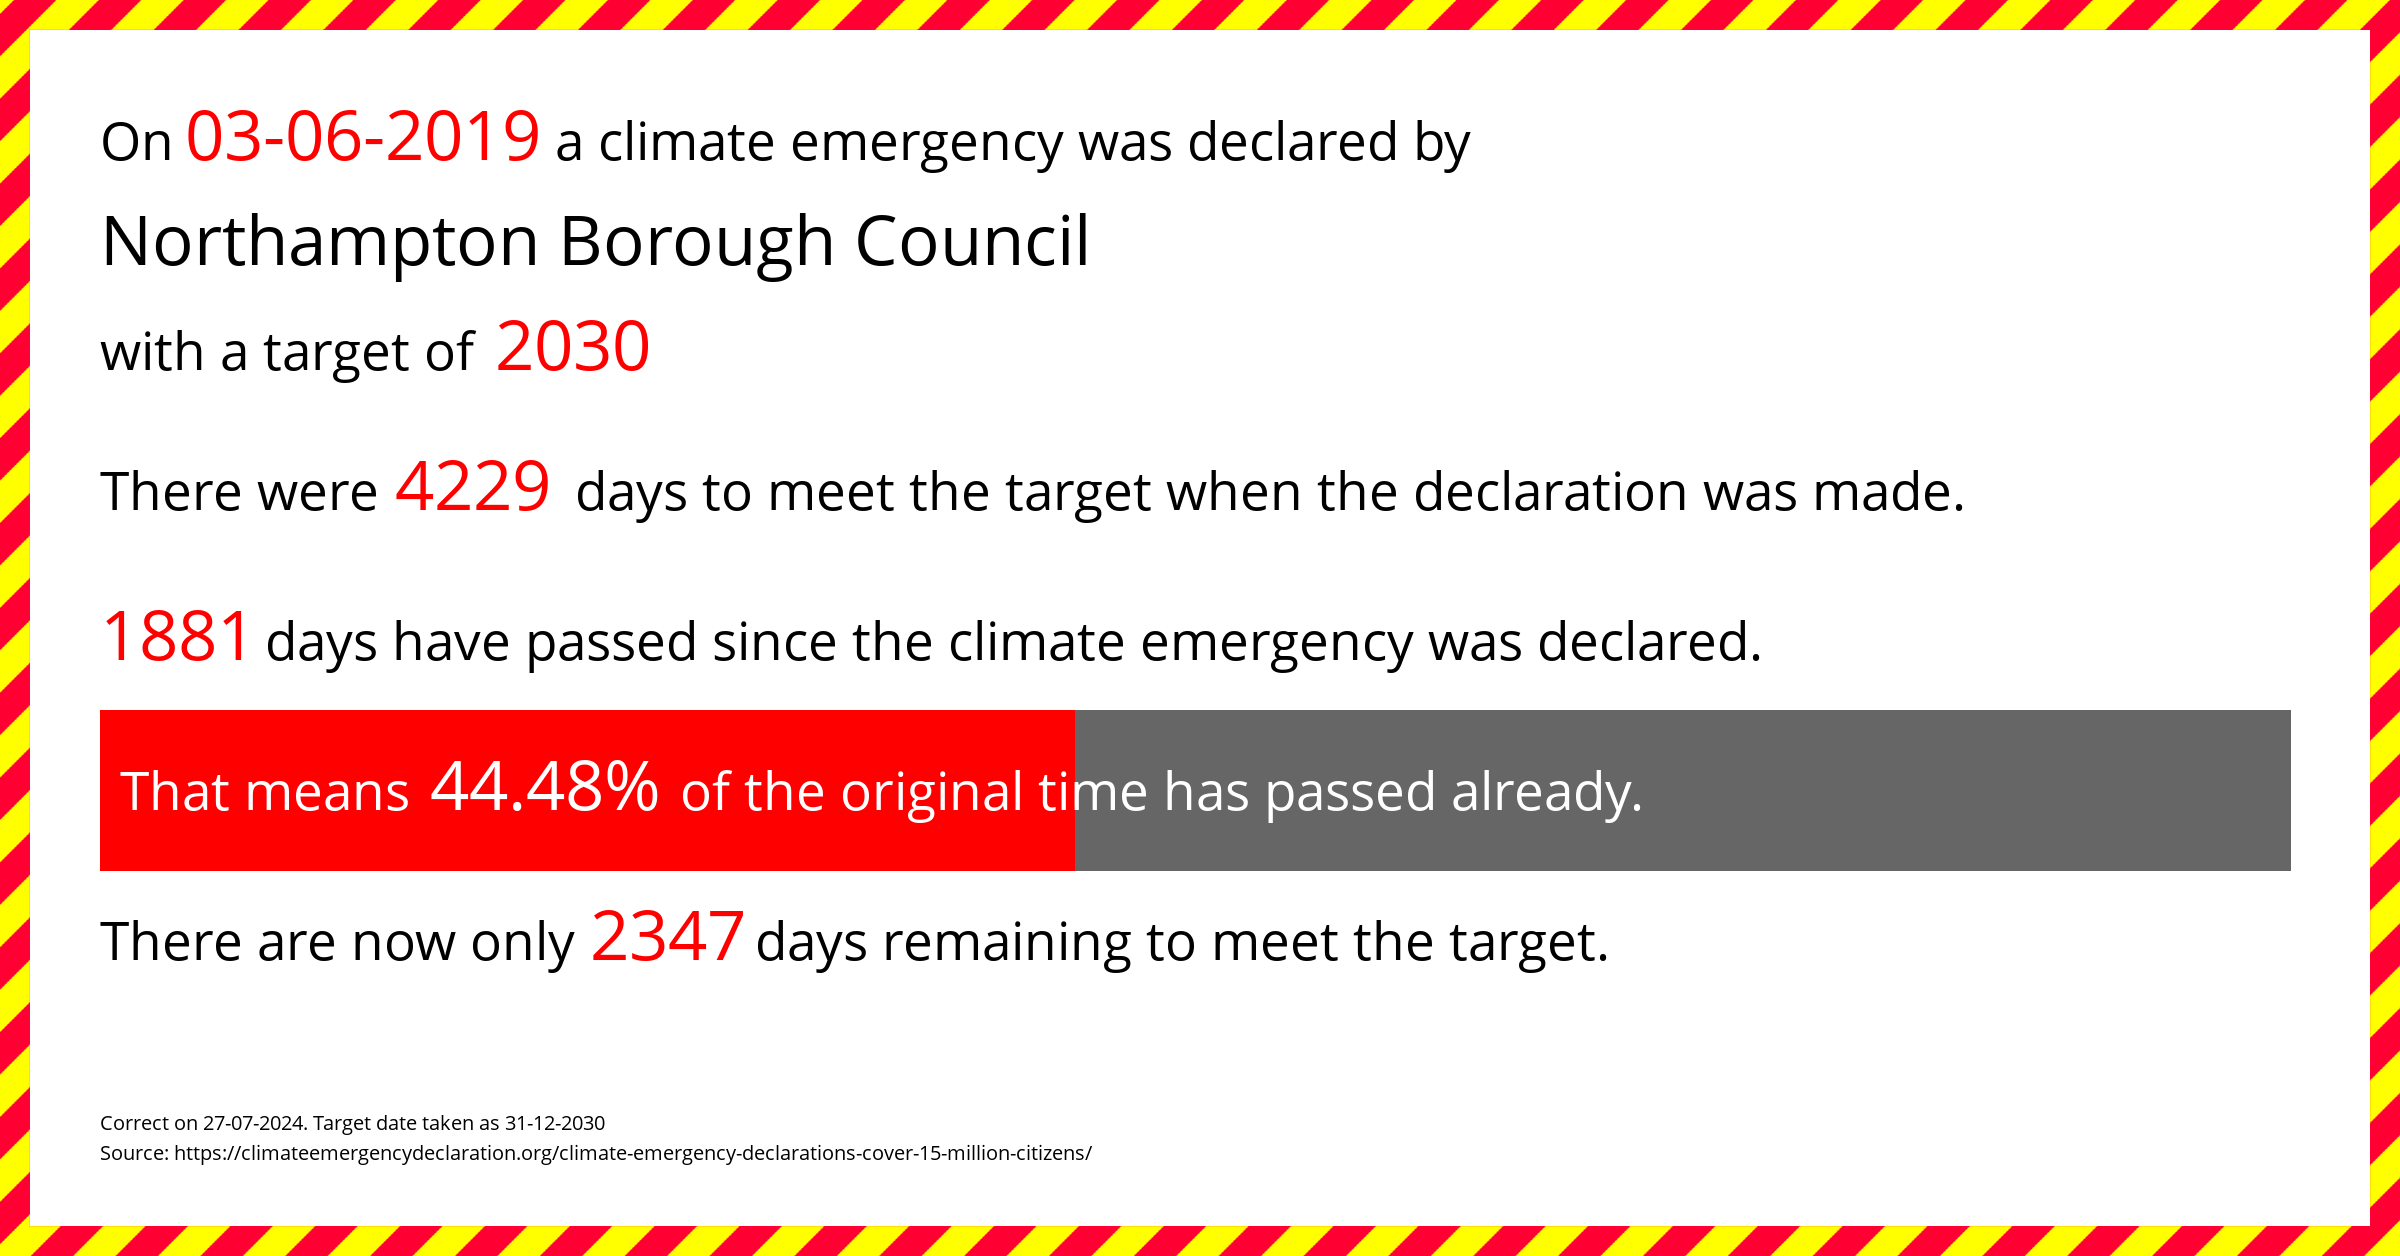 Northampton Borough Council declared a Climate emergency on Monday 3rd June 2019, with a target of 2030.